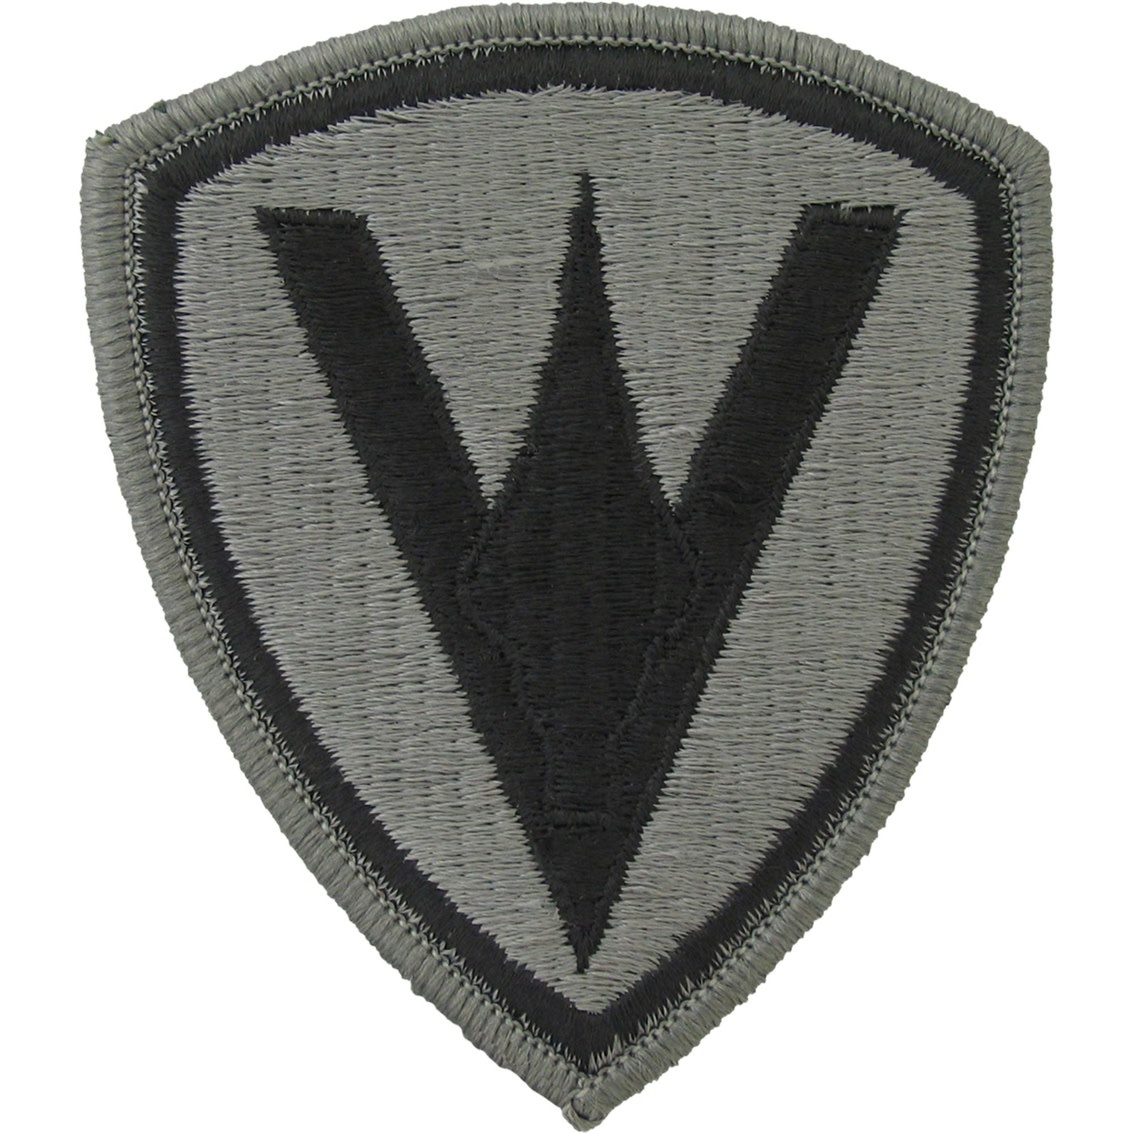 Military 5th Marine Division Patch